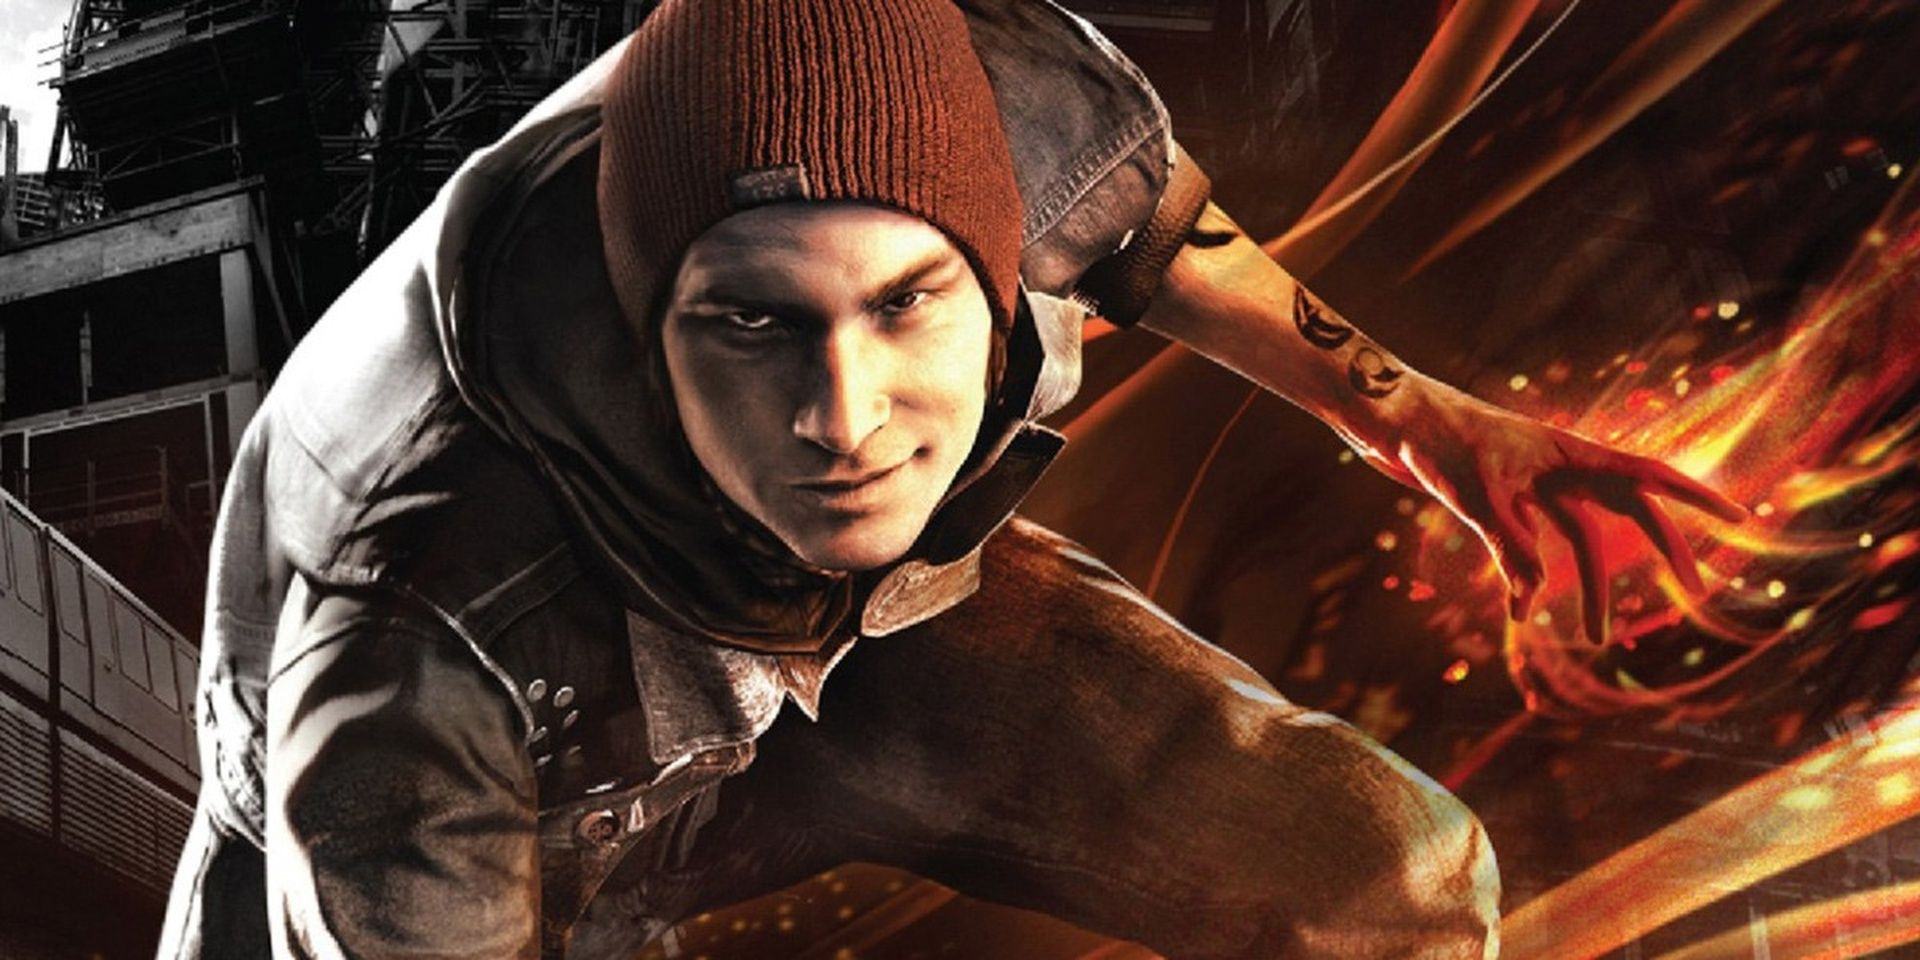 Cover photo of Infamous - Second Son leaning towards the camera, arms surrounded by flames